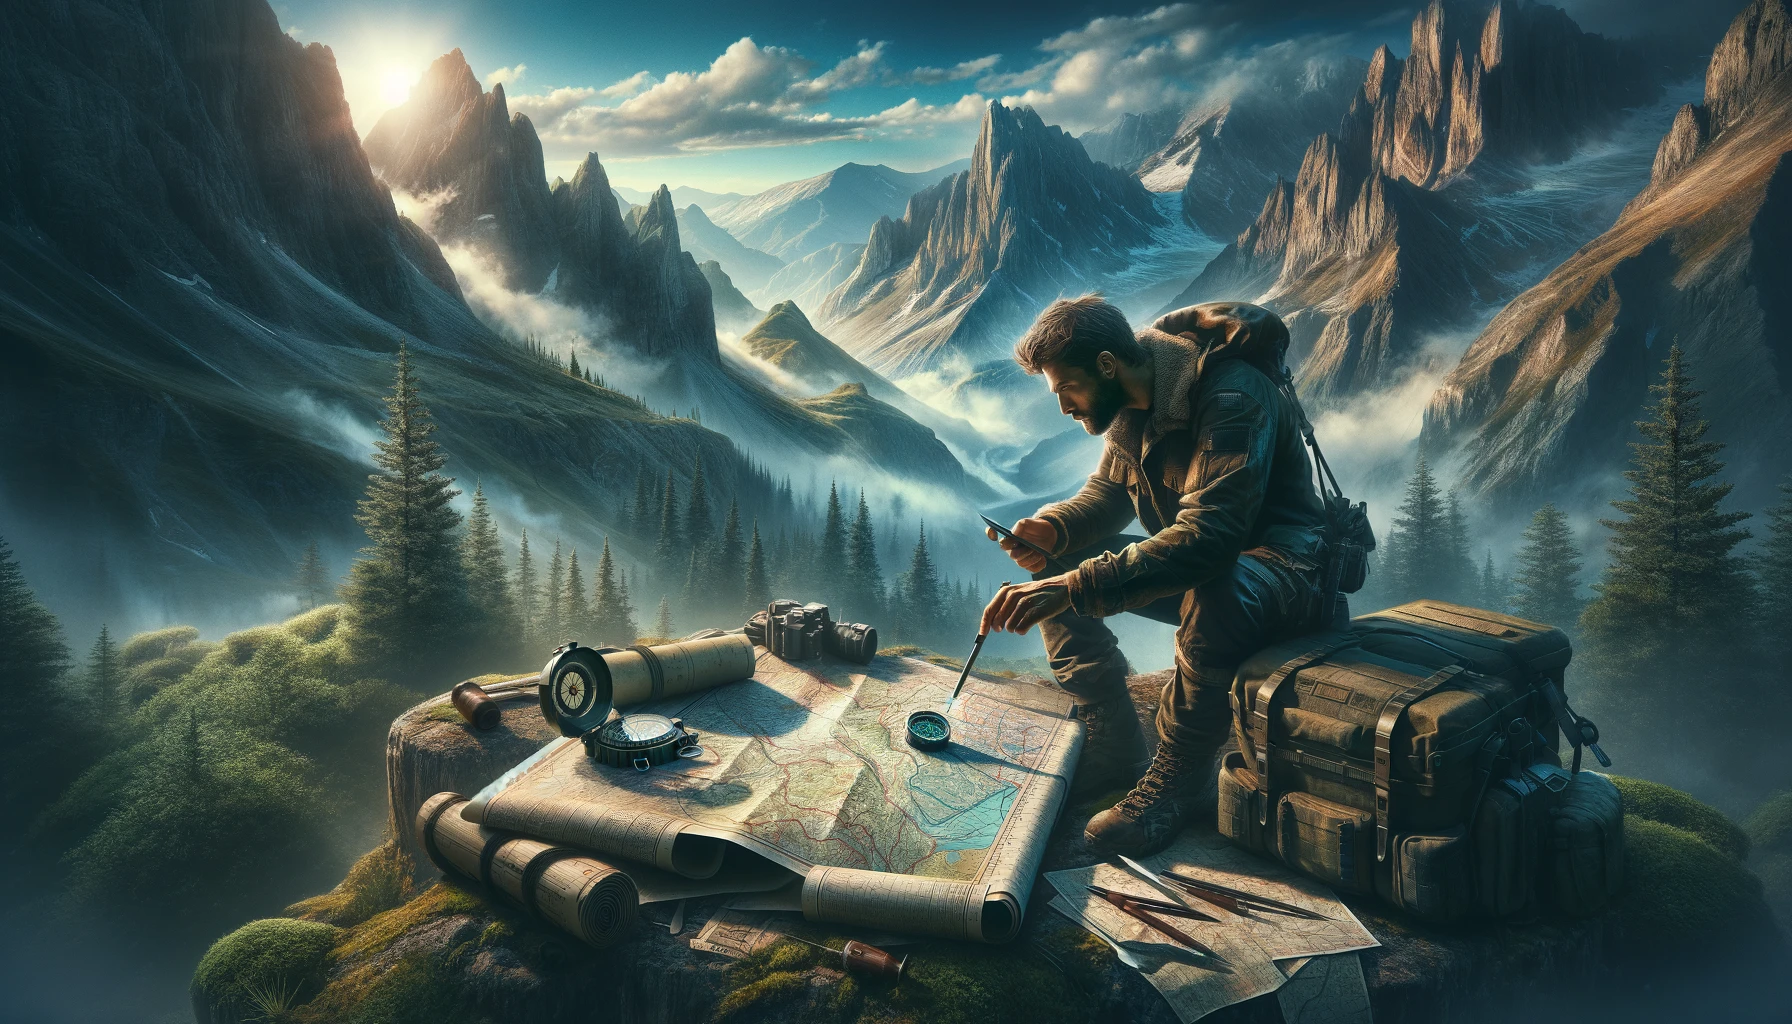 An individual expertly orienting a map in a wilderness setting, using natural landmarks and a compass, showcasing advanced map reading and orientation skills in a breathtaking outdoor environment